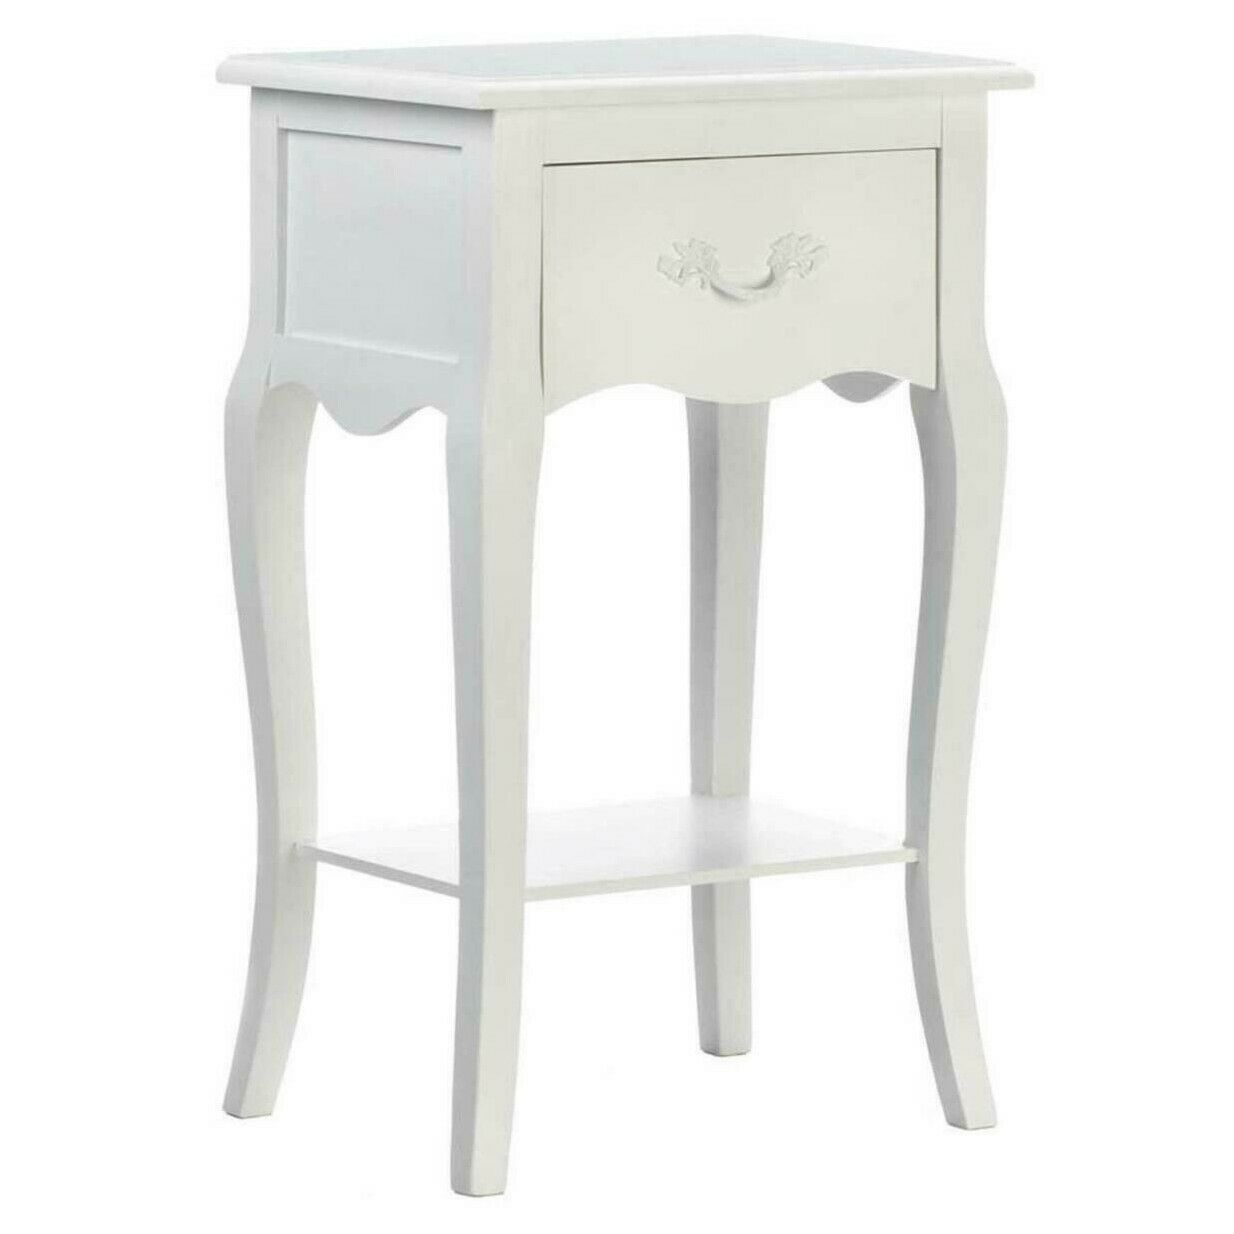 Romantic Country White Night Stand or Accent Table Accent Plus